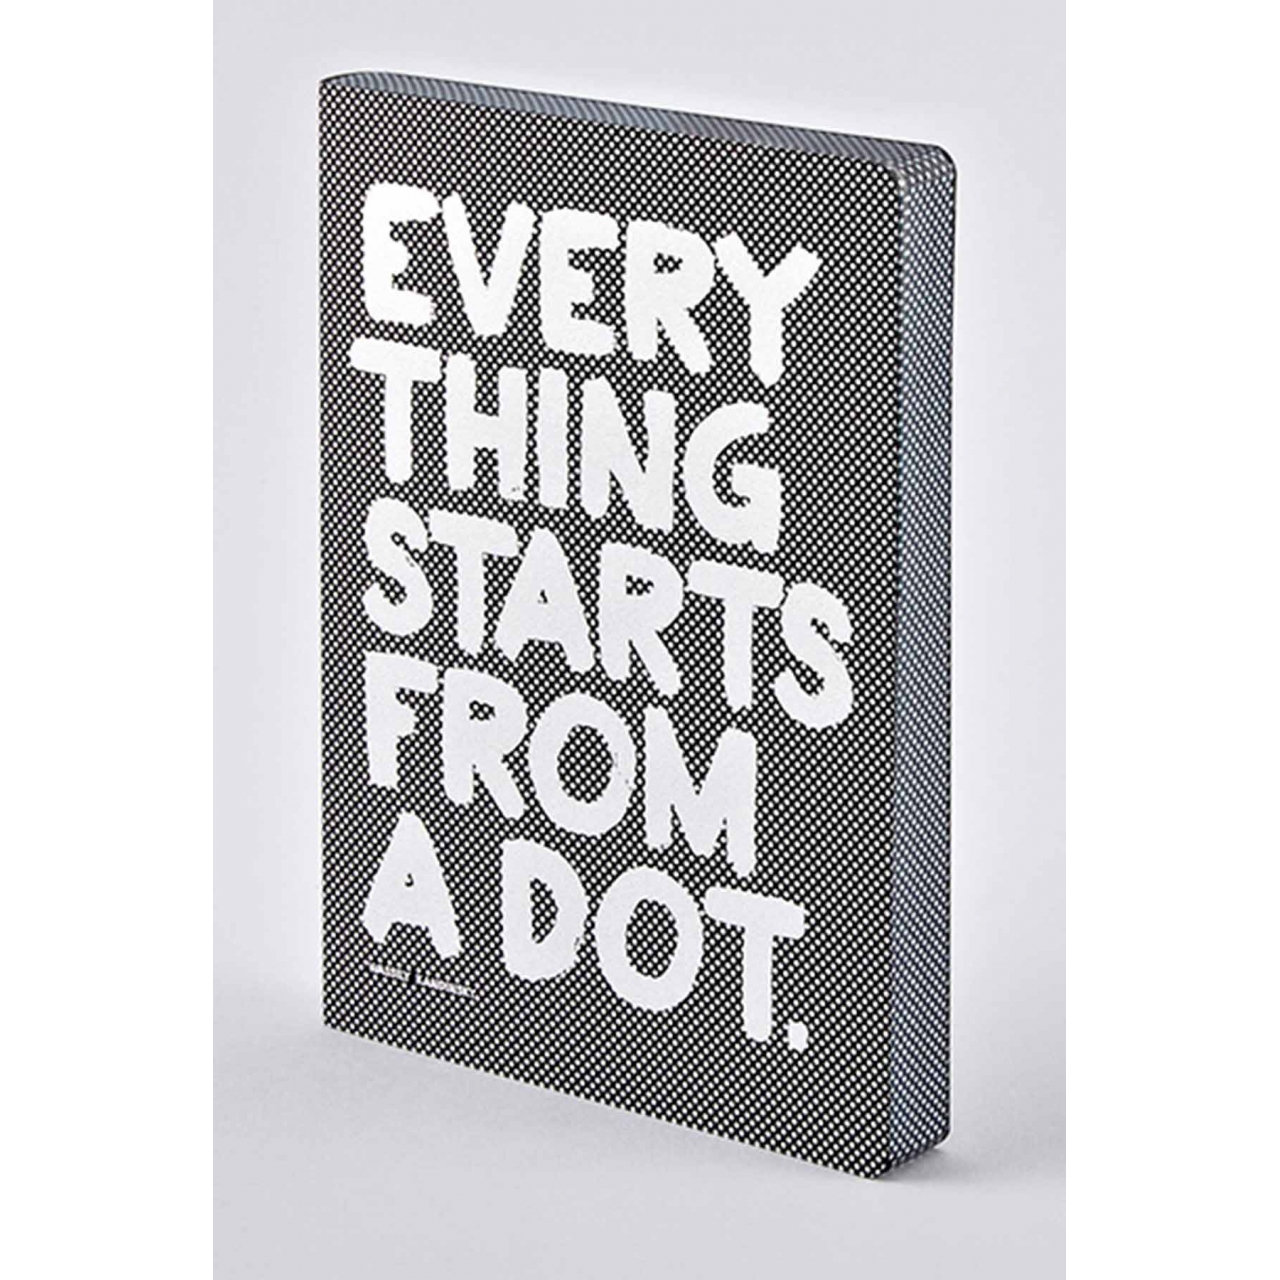 nuuna L - EVERYTHING STARTS FROM A DOT